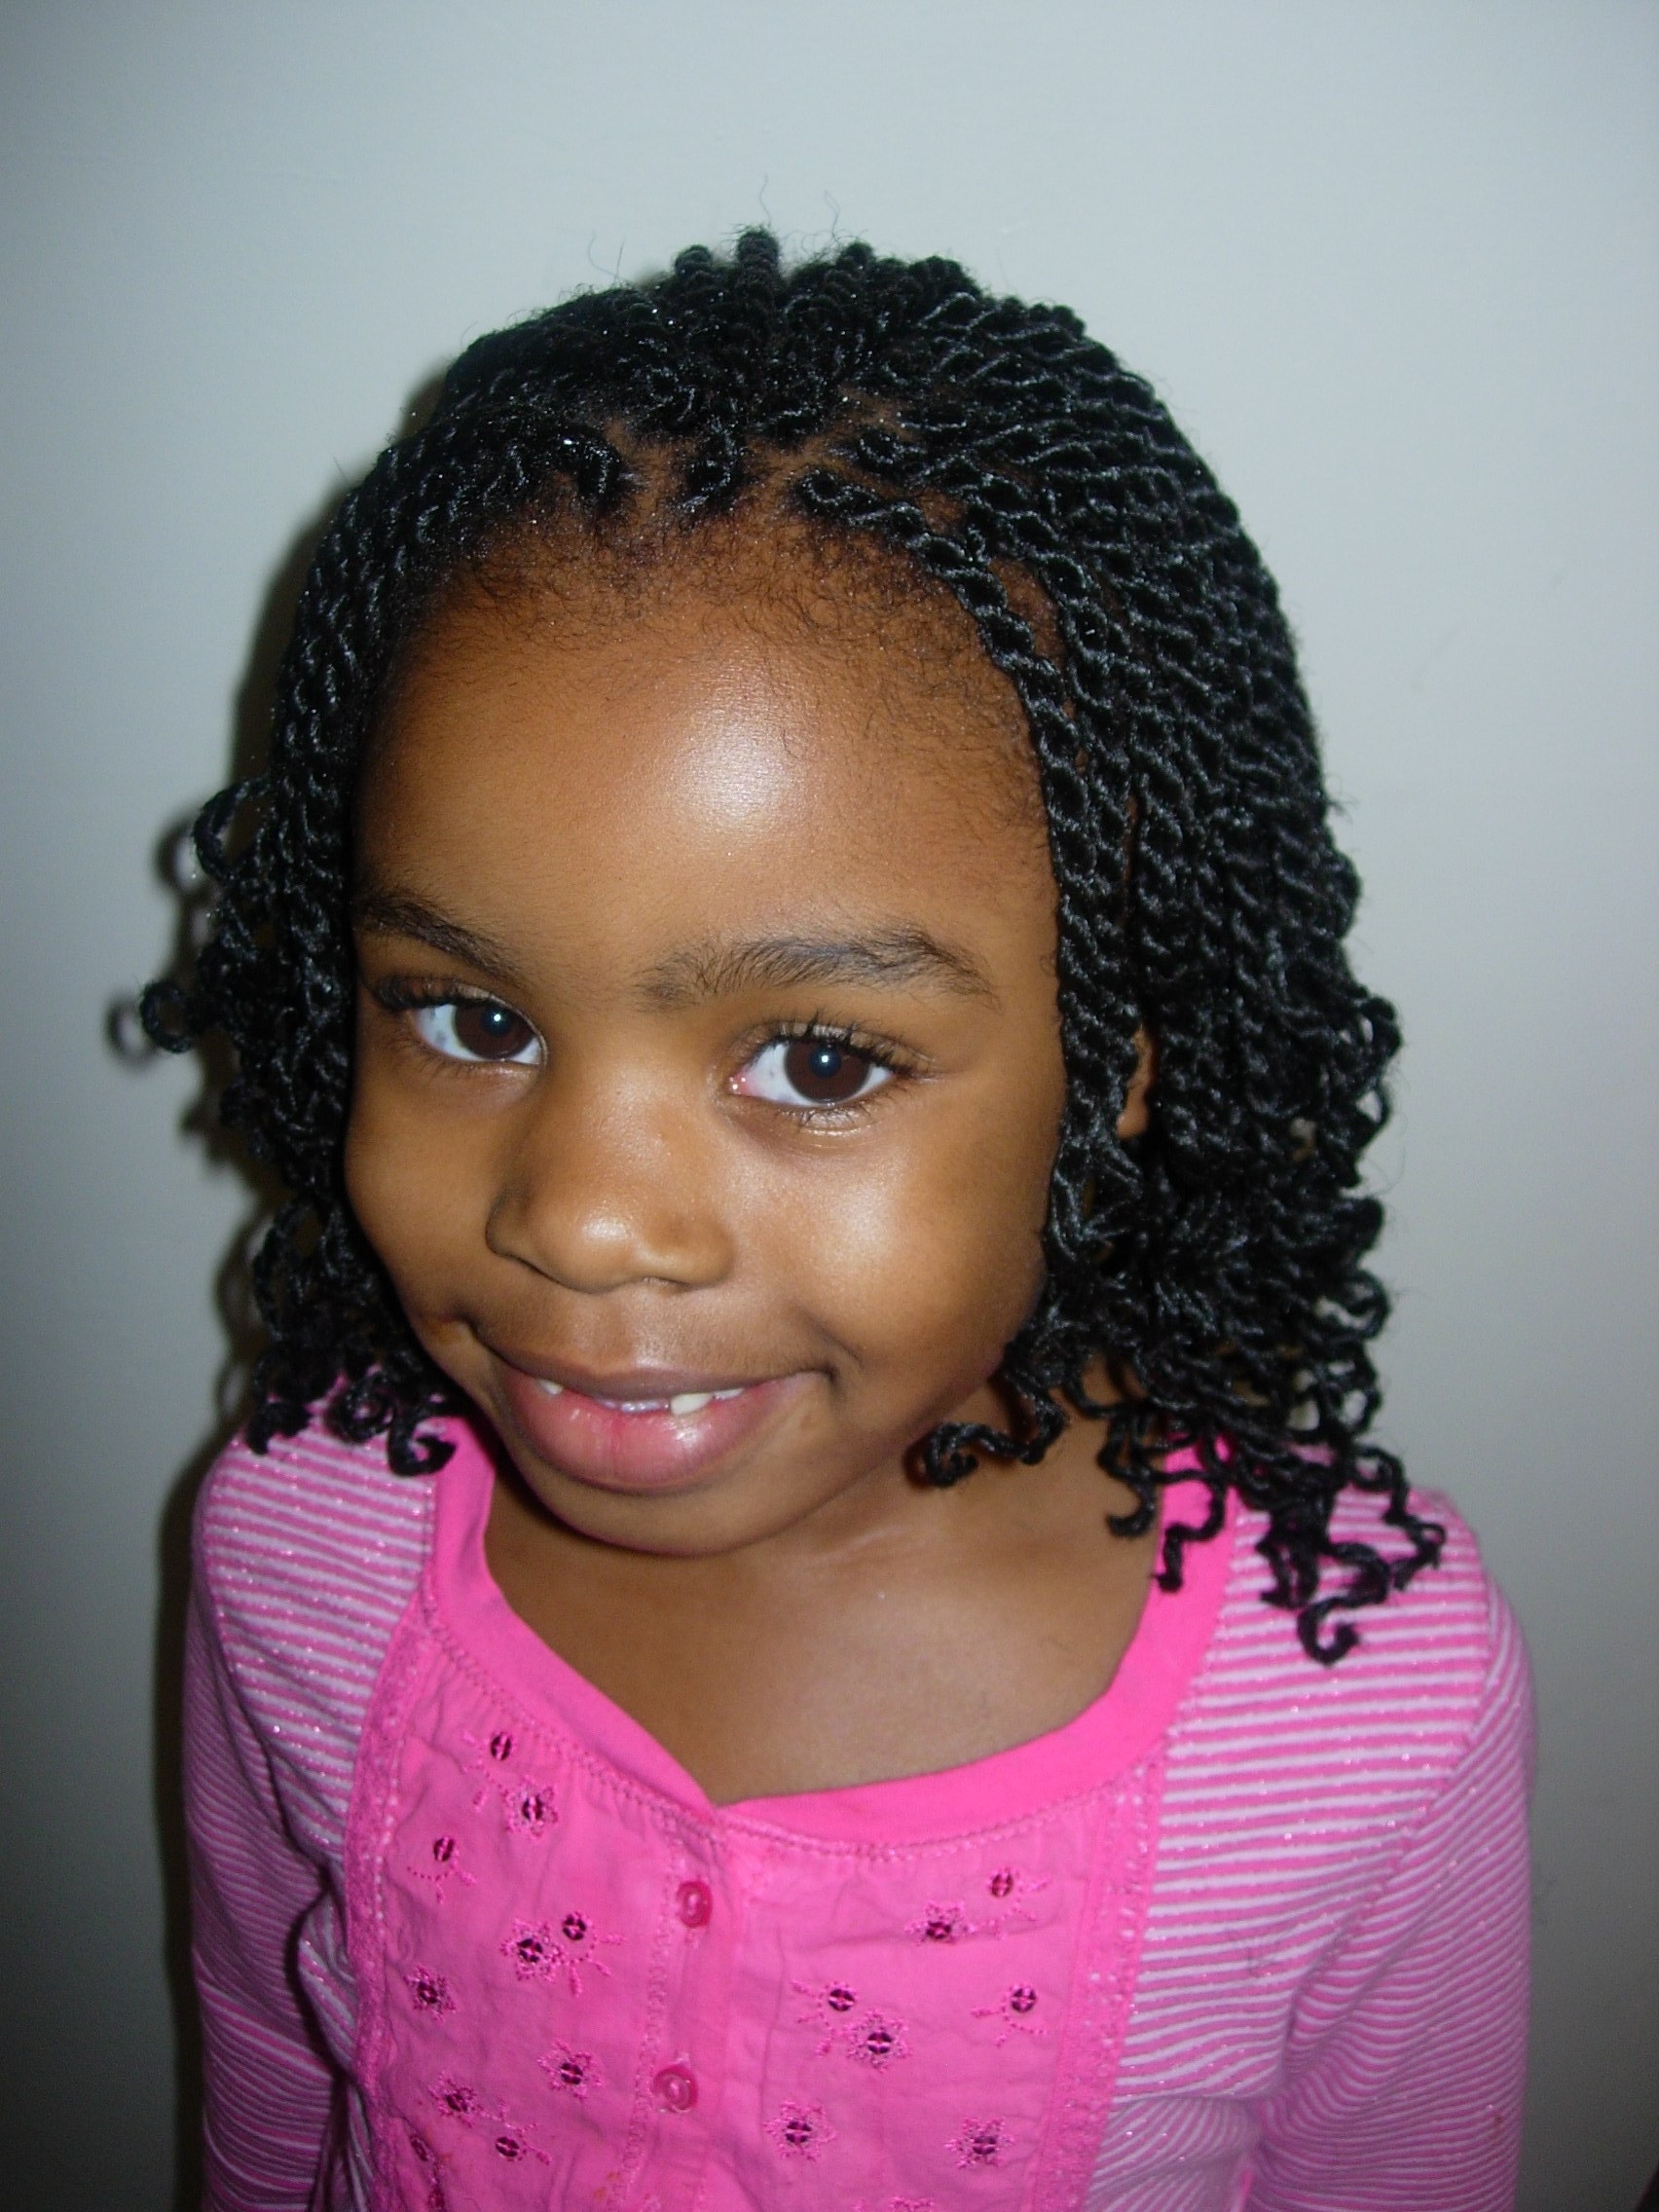 26 Top Photos Black Toddler Hairstyles Hair : Black Girls Hairstyles and Haircuts - 40 Cool Ideas for ...